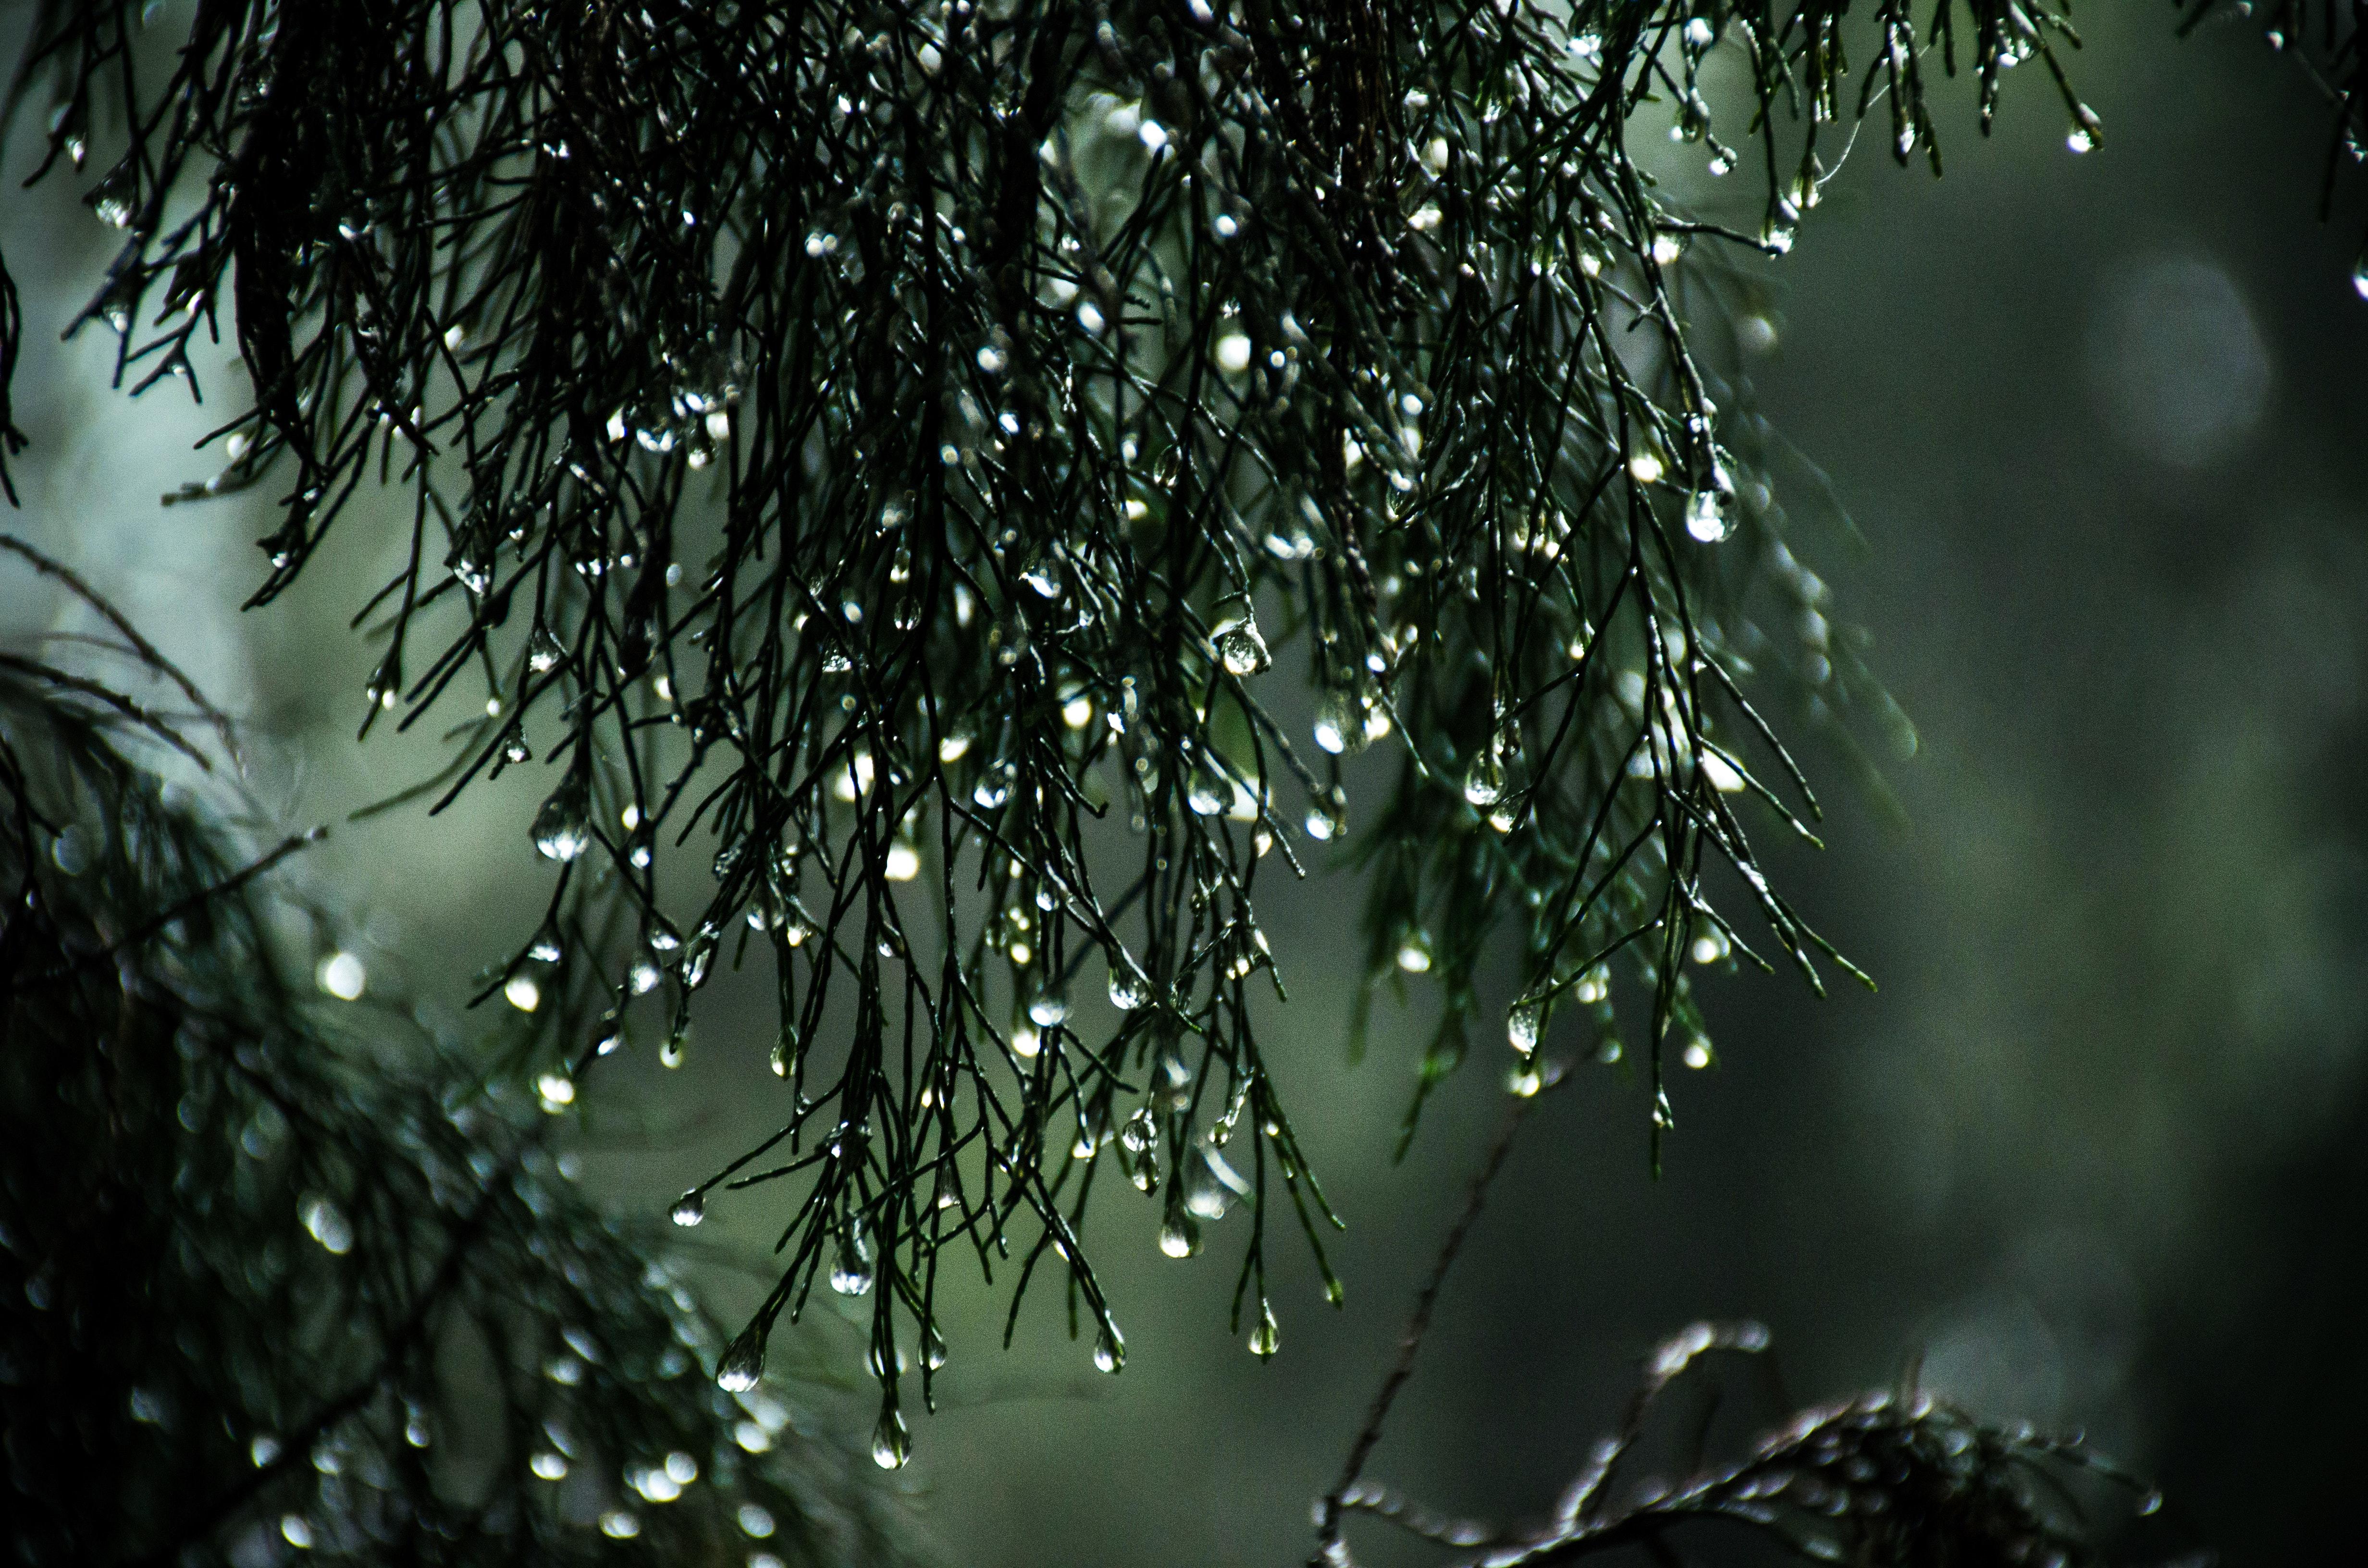 Rain Wallpapers Images Photos Pictures Backgrounds